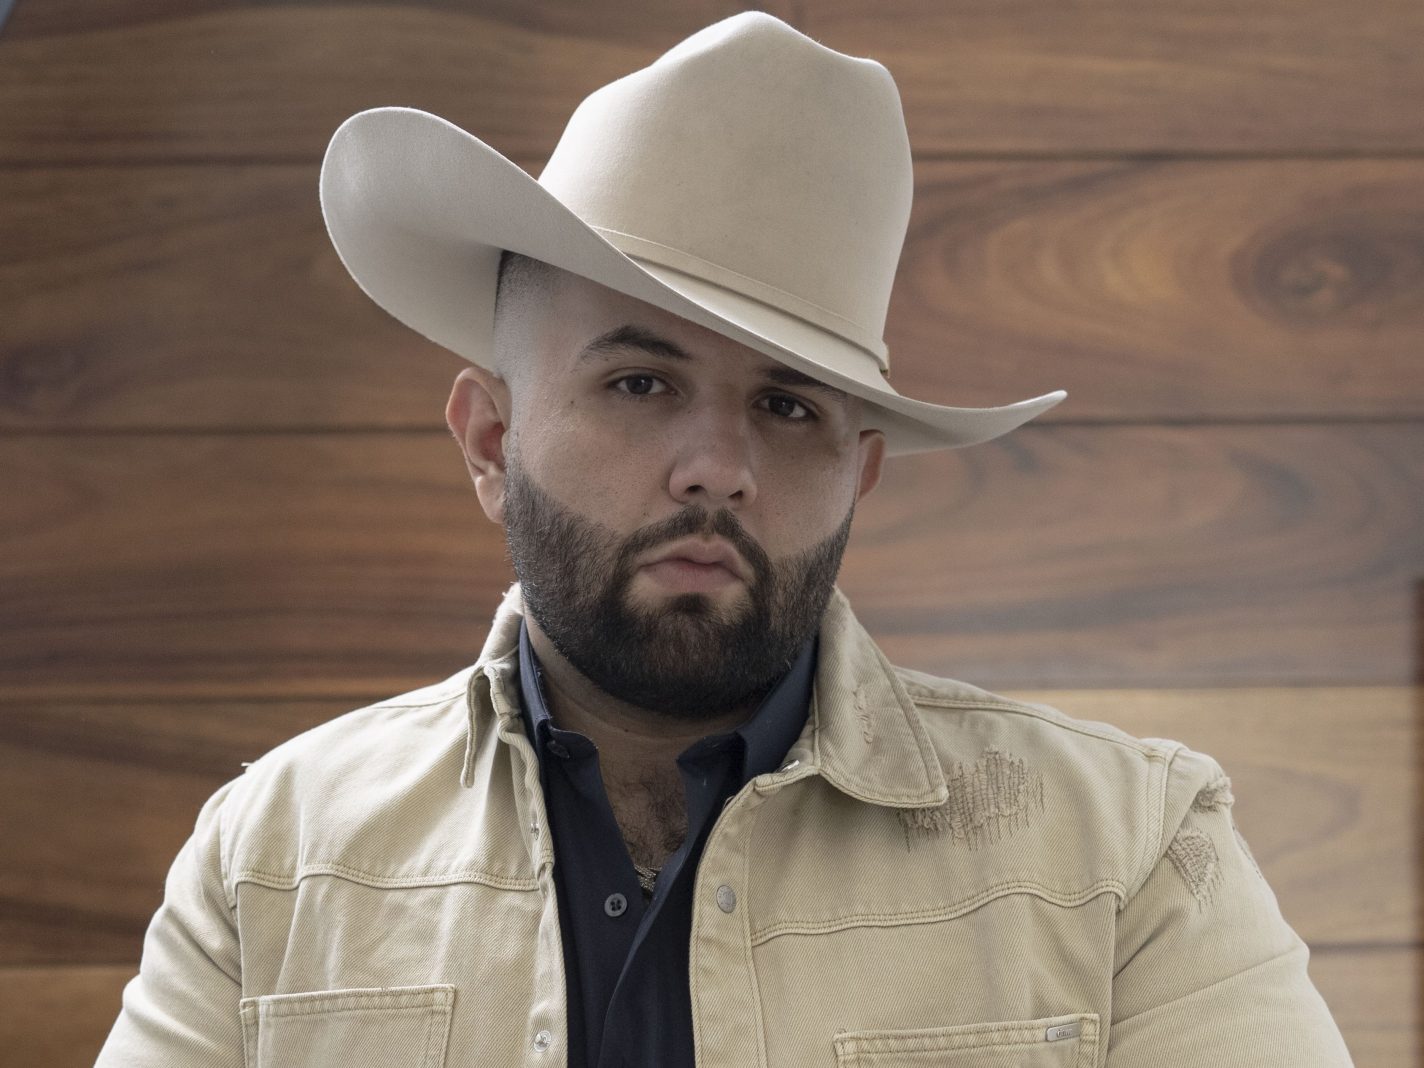 Carin León Sings His Heart Out In Tragic 'Cobarde' Music Video